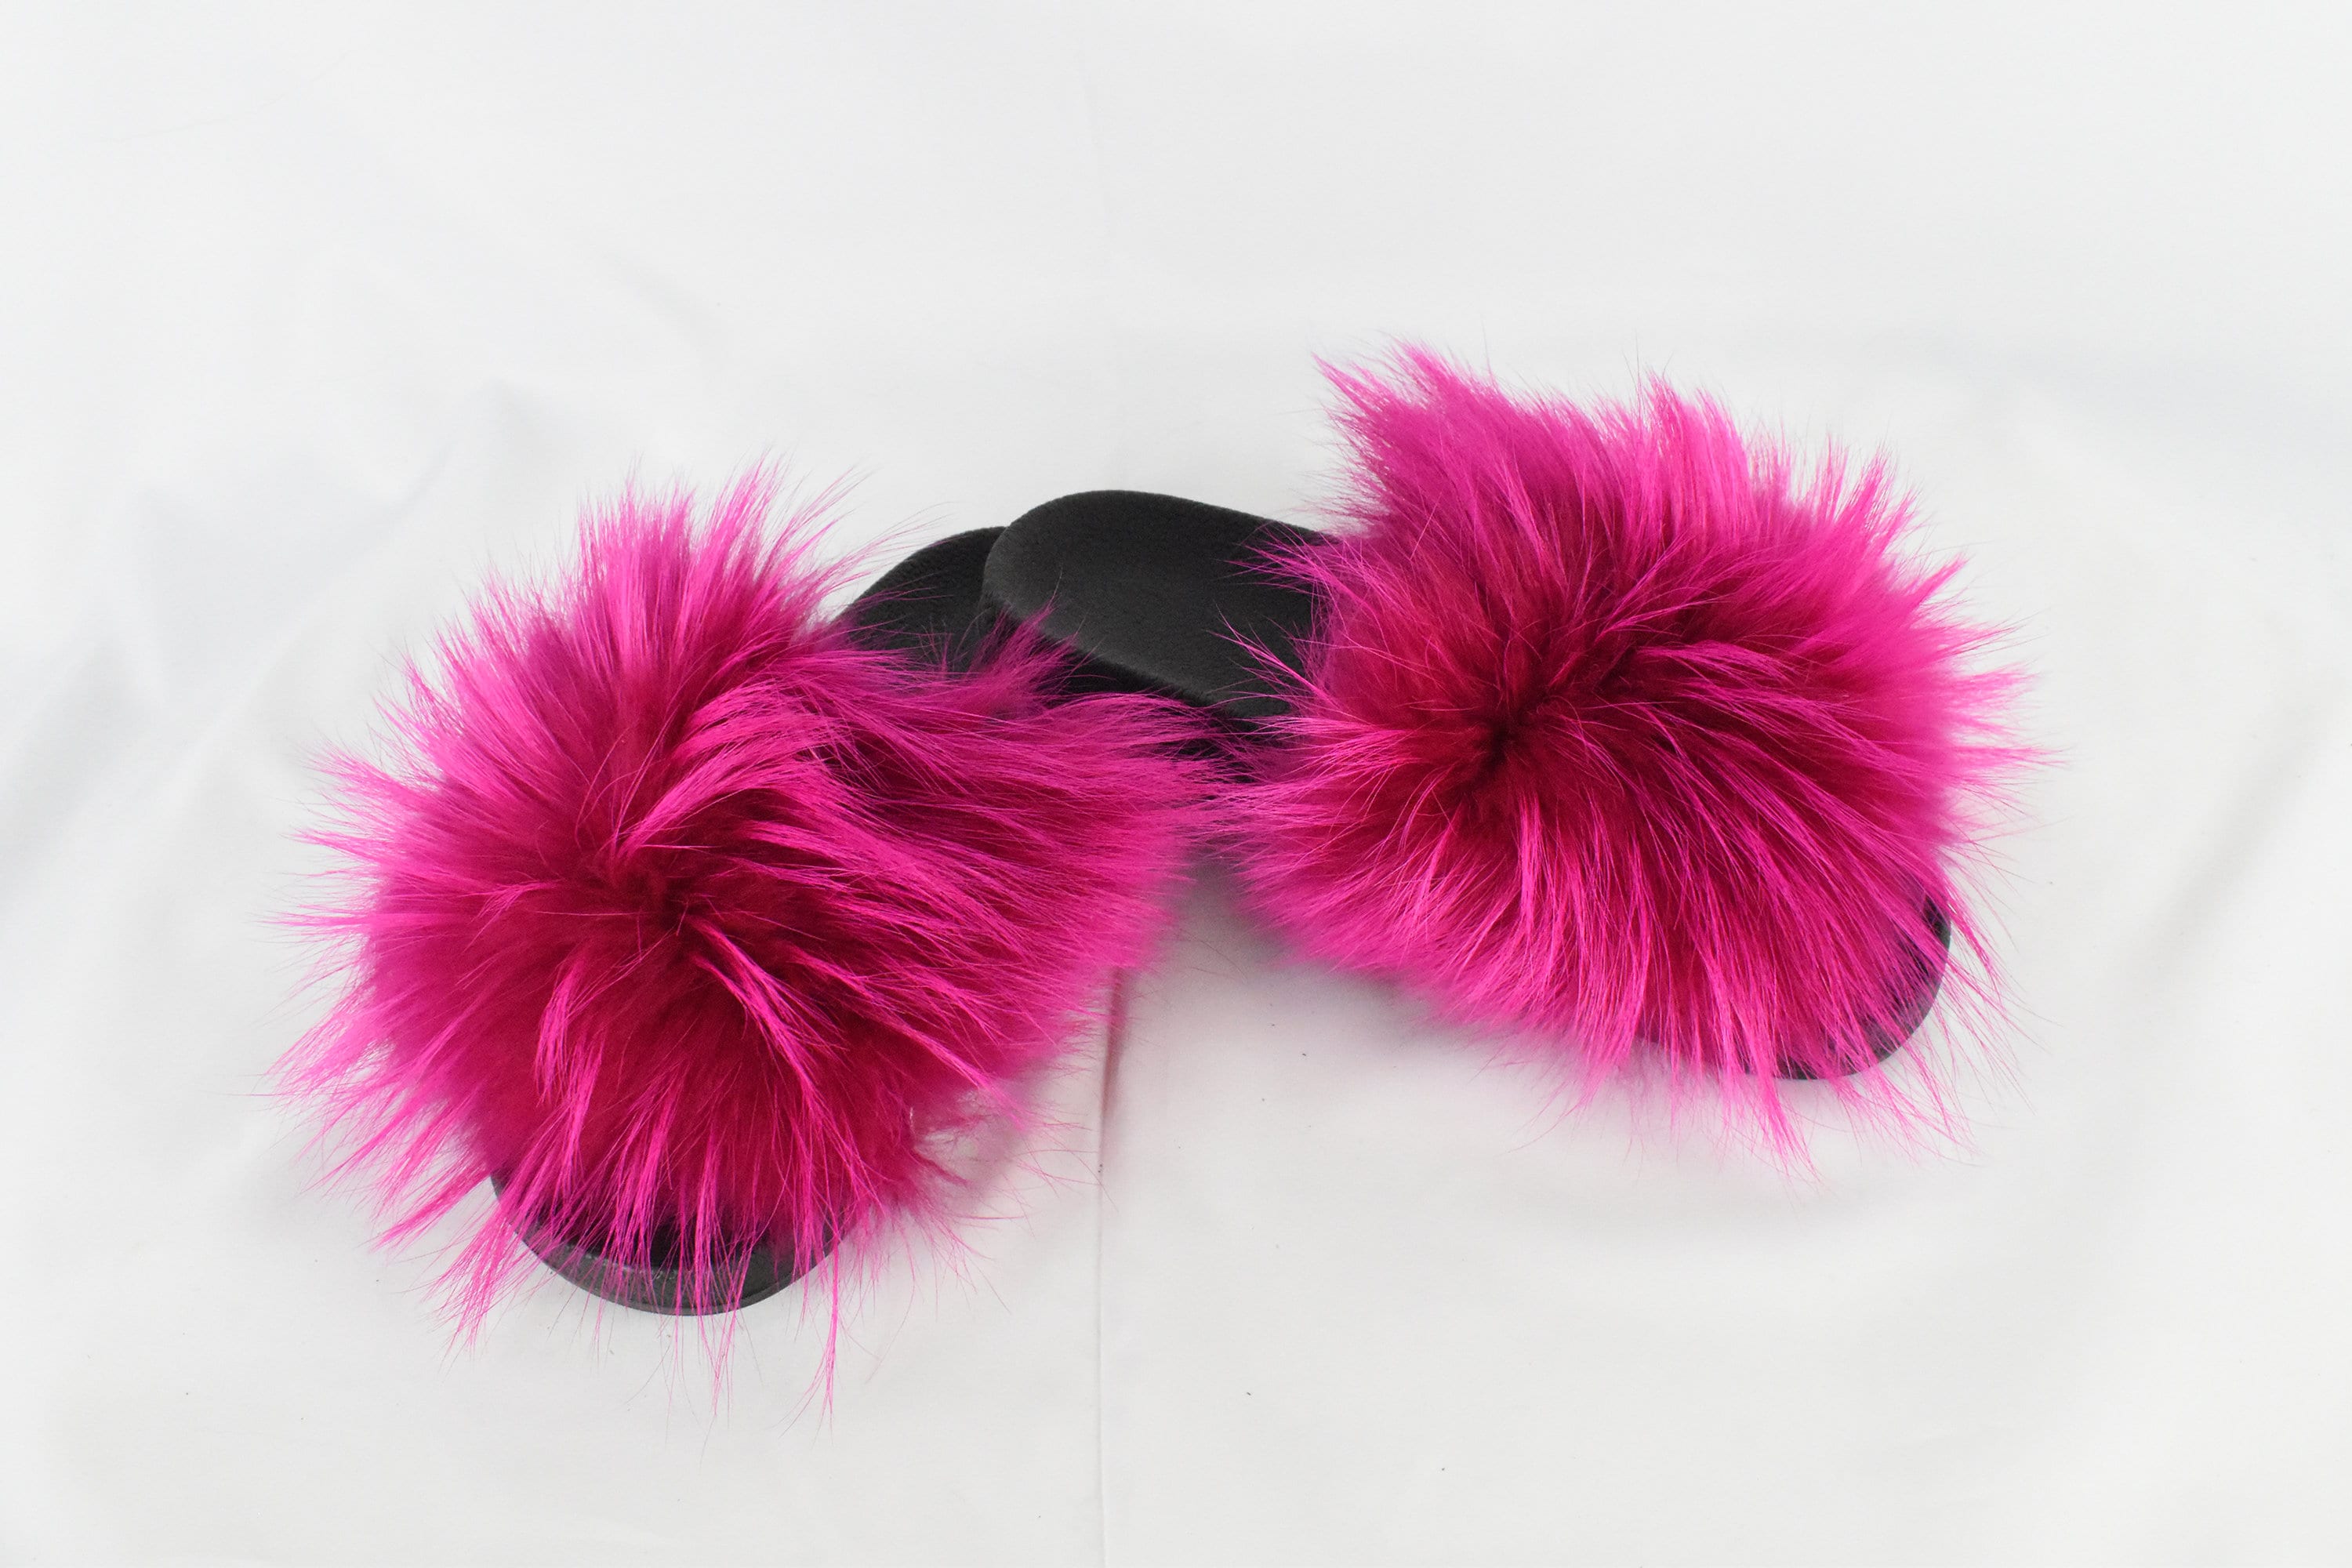 Fuchsia Fox Fur Slides - Made of 100% Real Fur -All sizes available